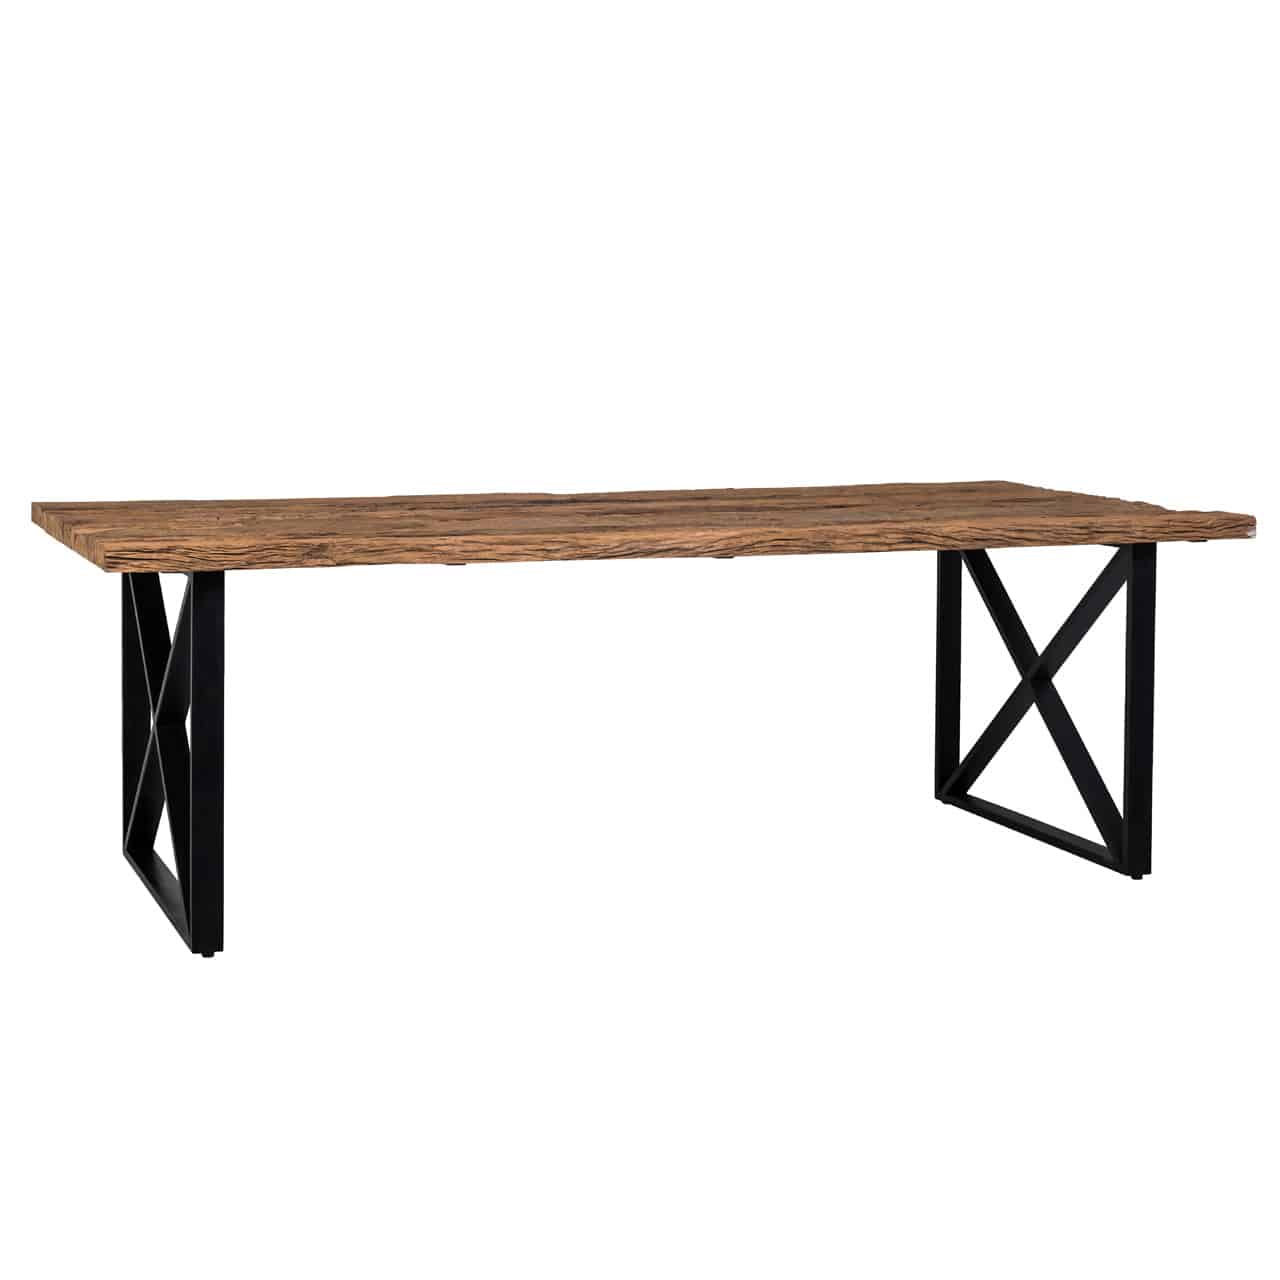 Karmal 2.4m Eco Wood Silver Dining Table